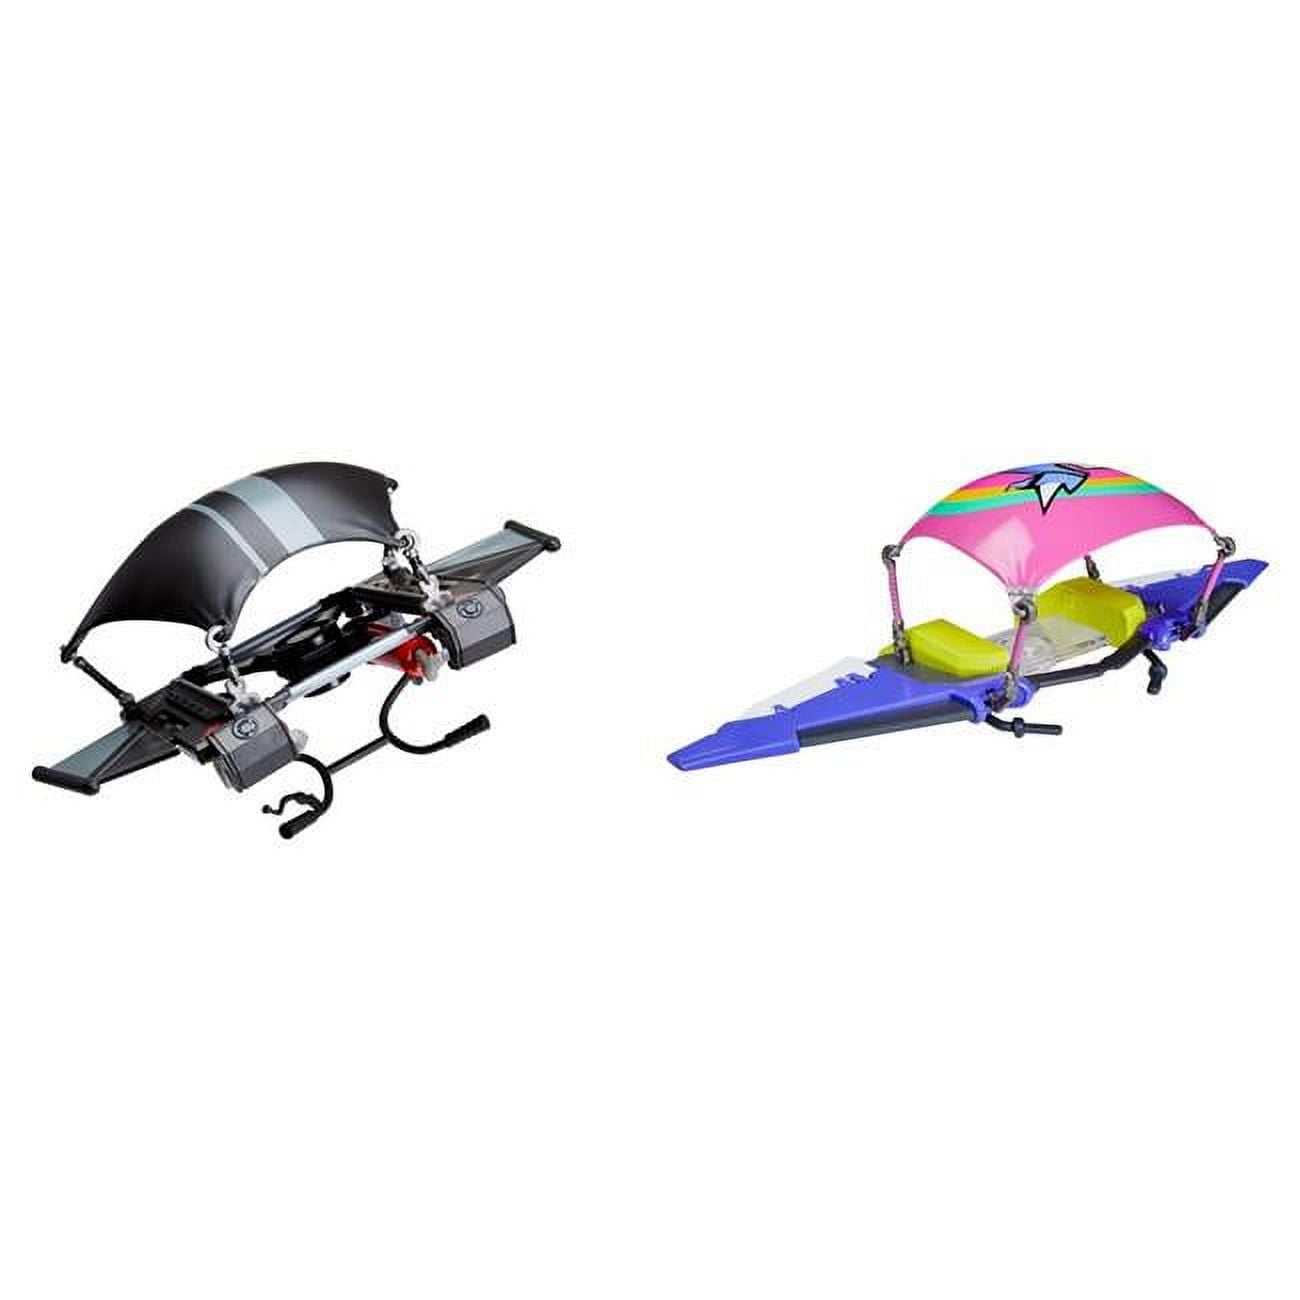 Picture of Hasbro HSBF5658 Fortnite Glider Vehicle Toy, Assorted Color - 5 Piece